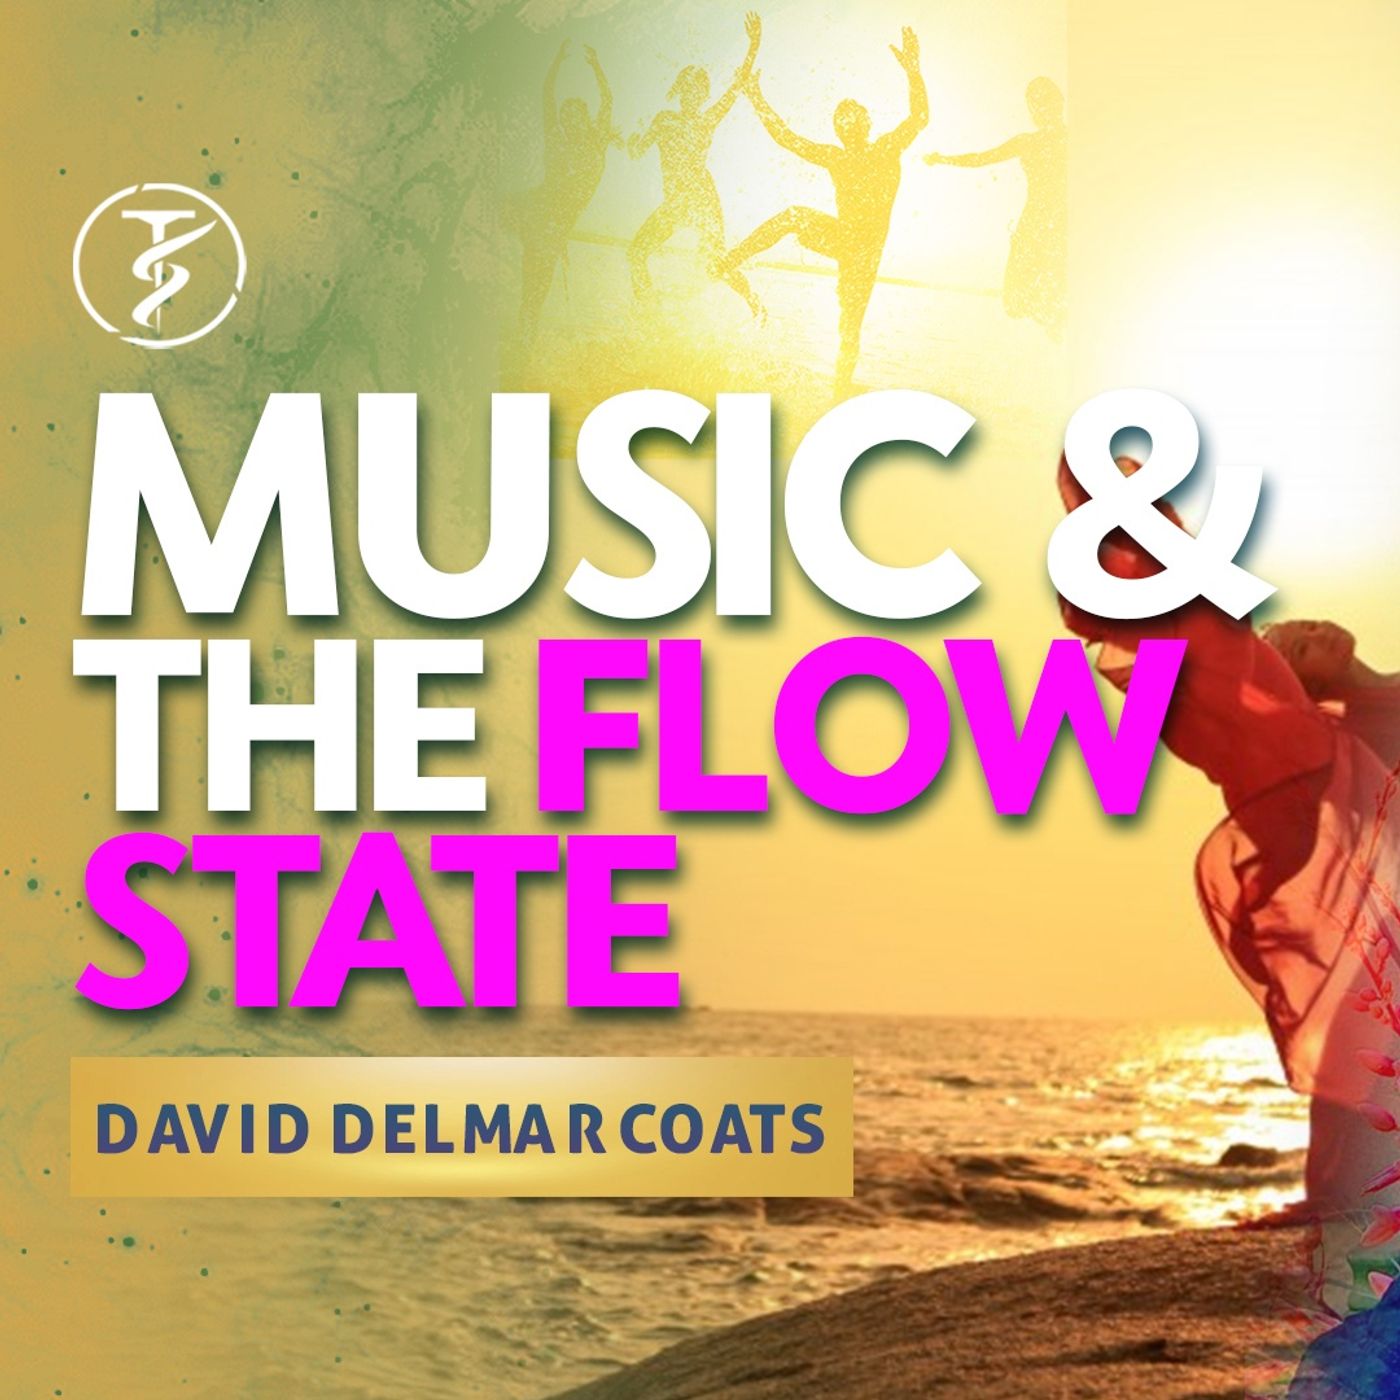 Spirituality, Music and the Flow State - David Delmar Coats and TruthSeekah